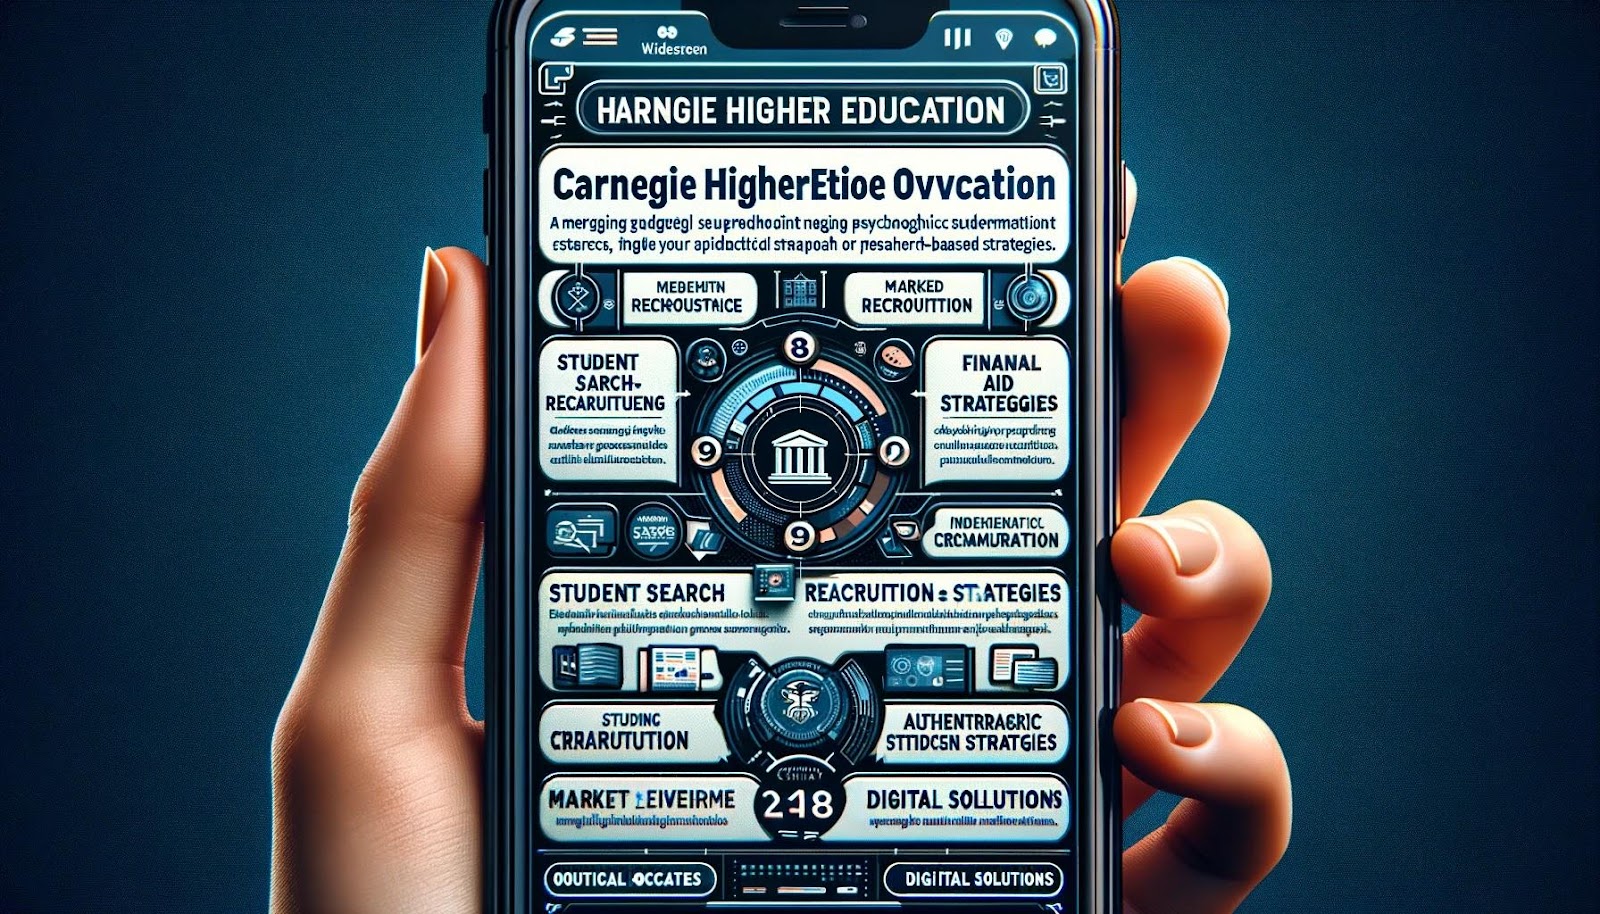 A widescreen digital phone-styled snapshot showcasing the 'Carnegie Higher Education Overview' theme. The display includes a summary of the company's extensive experience in higher education marketing and their dedication to research-based strategies. It features sections for services like student search, recruitment, financial aid strategies, market research, and digital solutions. Emphasize the unique approach of merging psychographic student research with various digital and operations strategies. Illustrate outcomes like improved student recruitment, broader audience reach, and authentic institutional representation. The design should have a sleek, modern look with the brand color and logo, reflecting technological prowess.


social media, higher education clients, higher ed market, education marketing agencies, marketing strategies, digital campaigns, law school, college university, lead generation